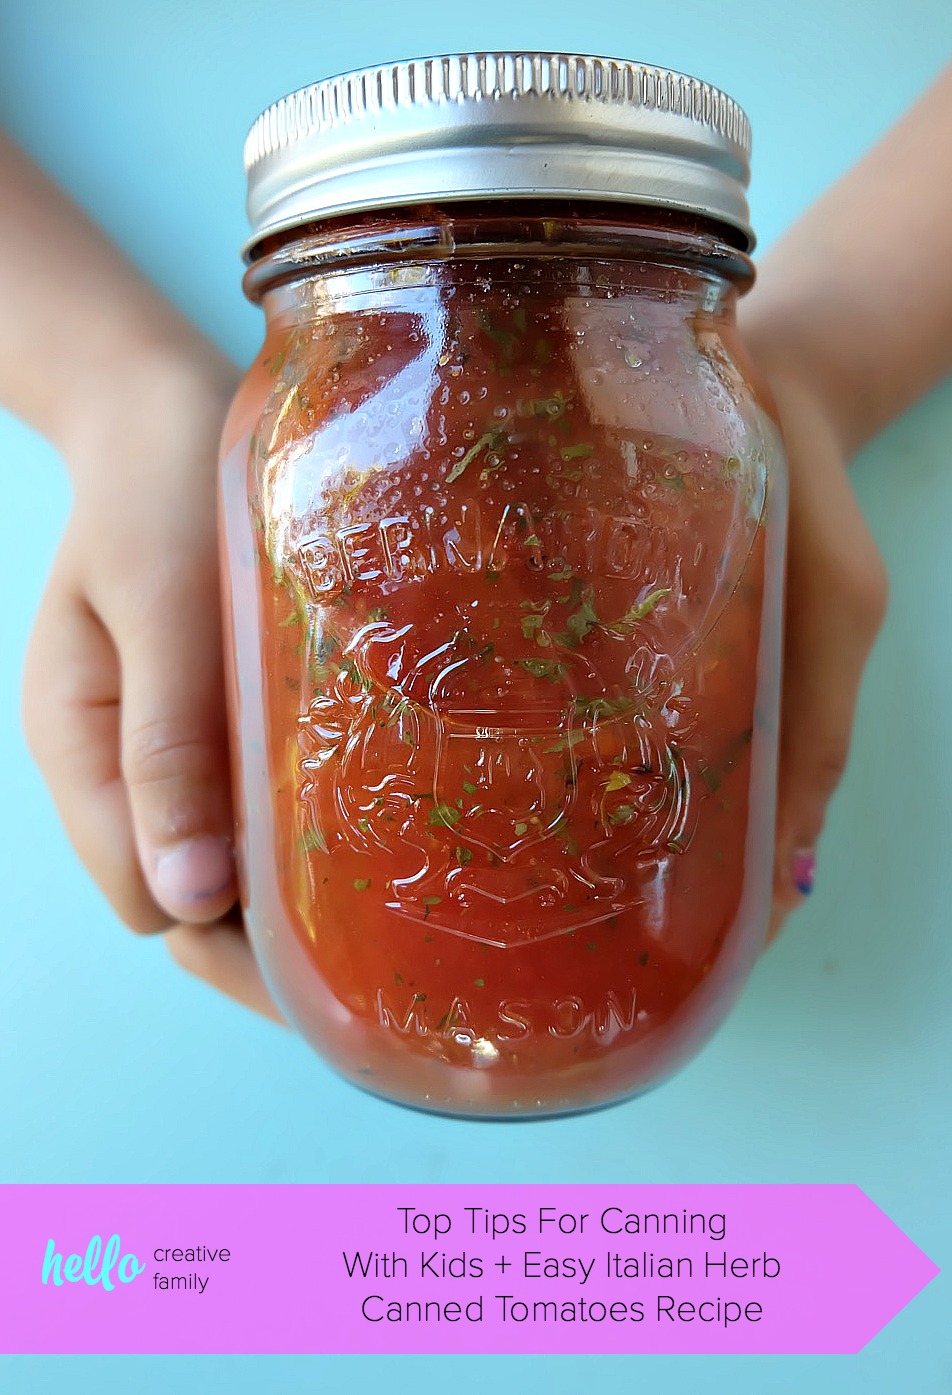 Get canning with your family this summer! We're sharing our top tiGet canning with your family this summer! We're sharing our top tips for canning with kids along with step by step photos and instructions for how to make our Easy Italian Herb Canned Tomatoes Recipe! We take all the intimidation out of canning so you can pass this handmade art along to your kids! #Canning #Recipe #Tomatoes #KidsCooking #Sponsored